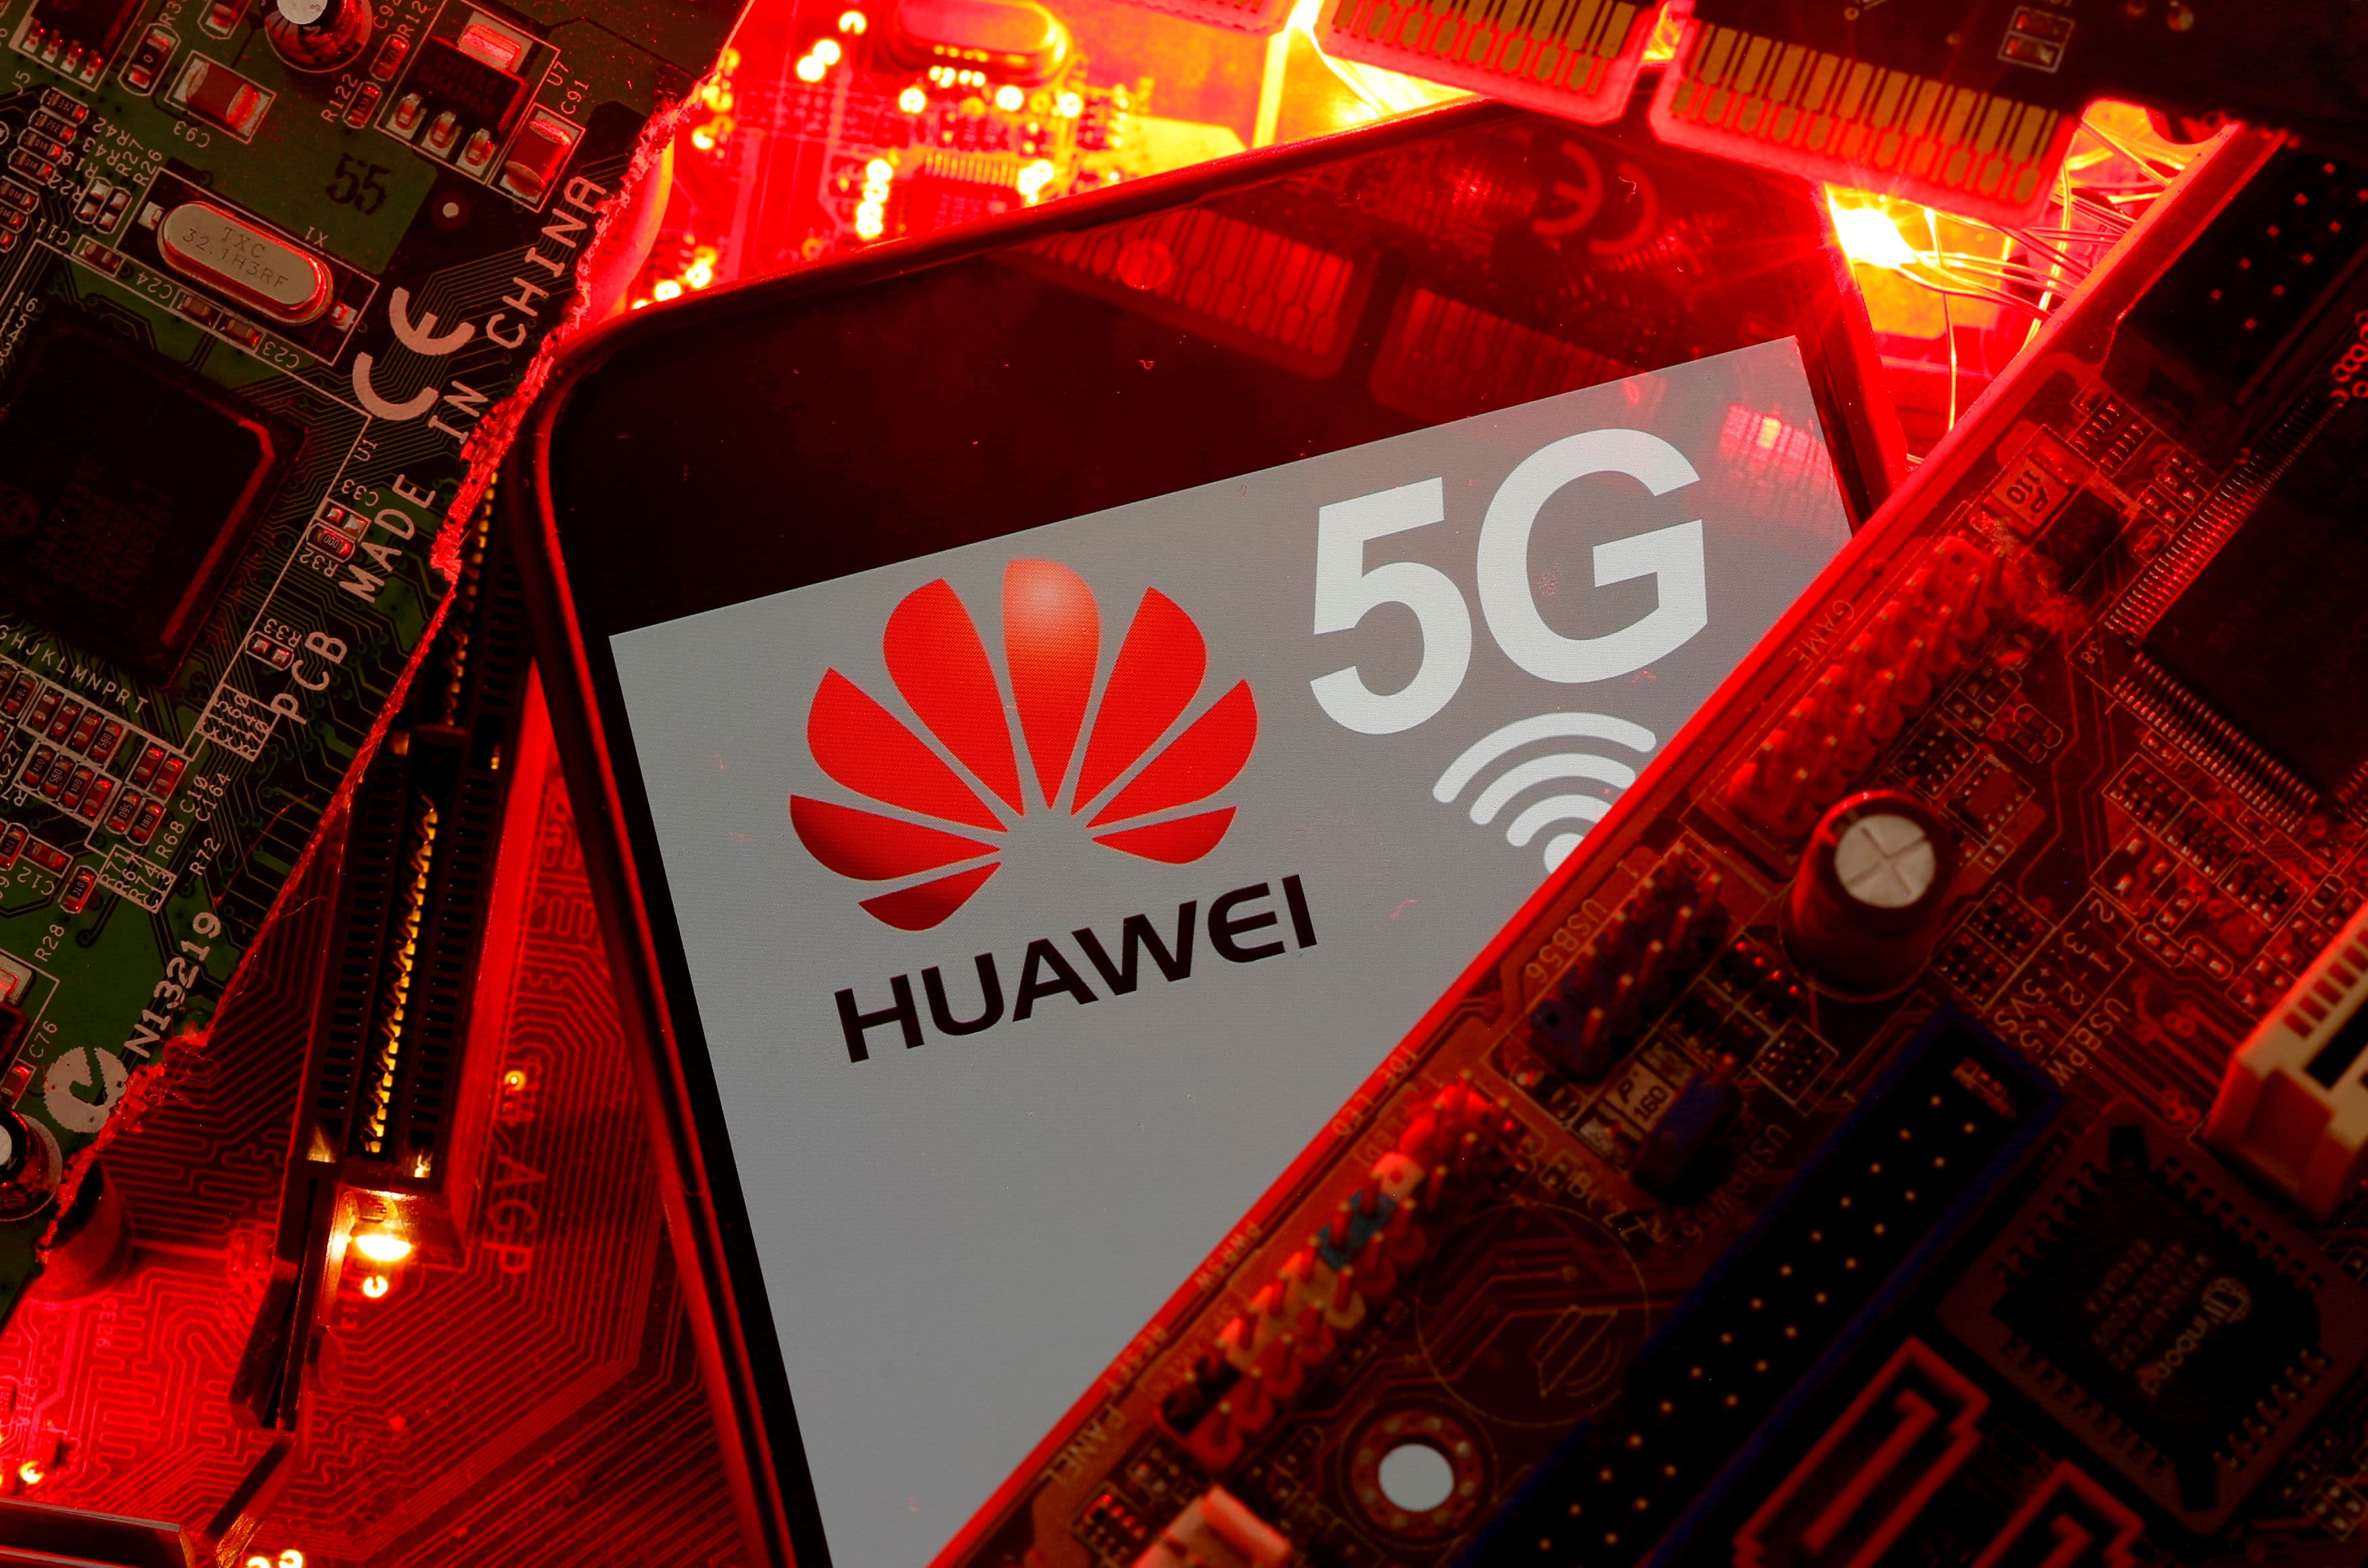 Huawei will charge royalties from smartphone makers using its 5G technology